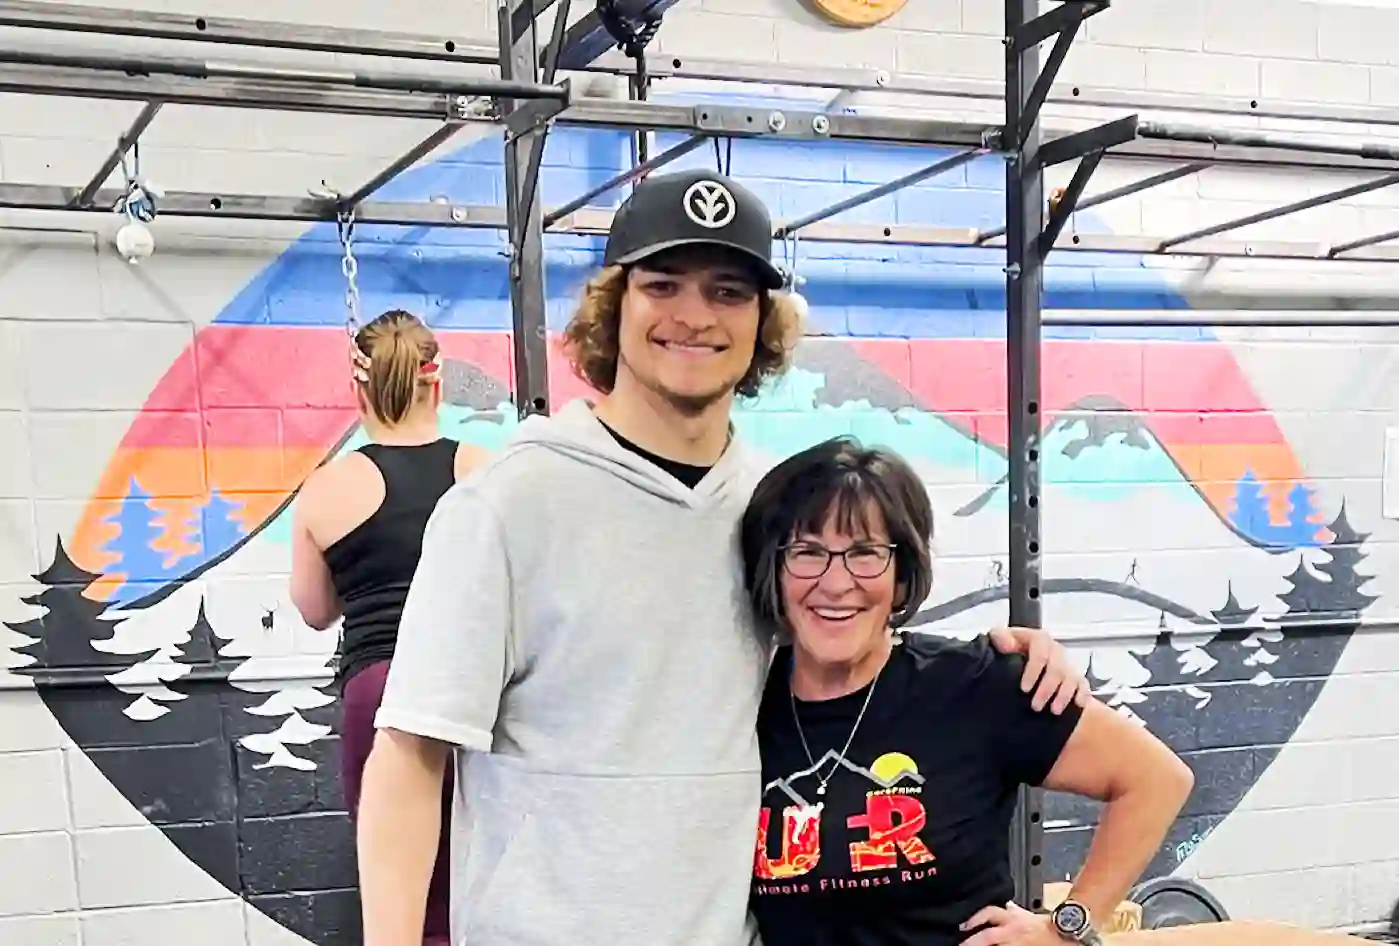 Ellis stands with his arm around CoreFit member Cindi, both smiling, inside of CoreFit.